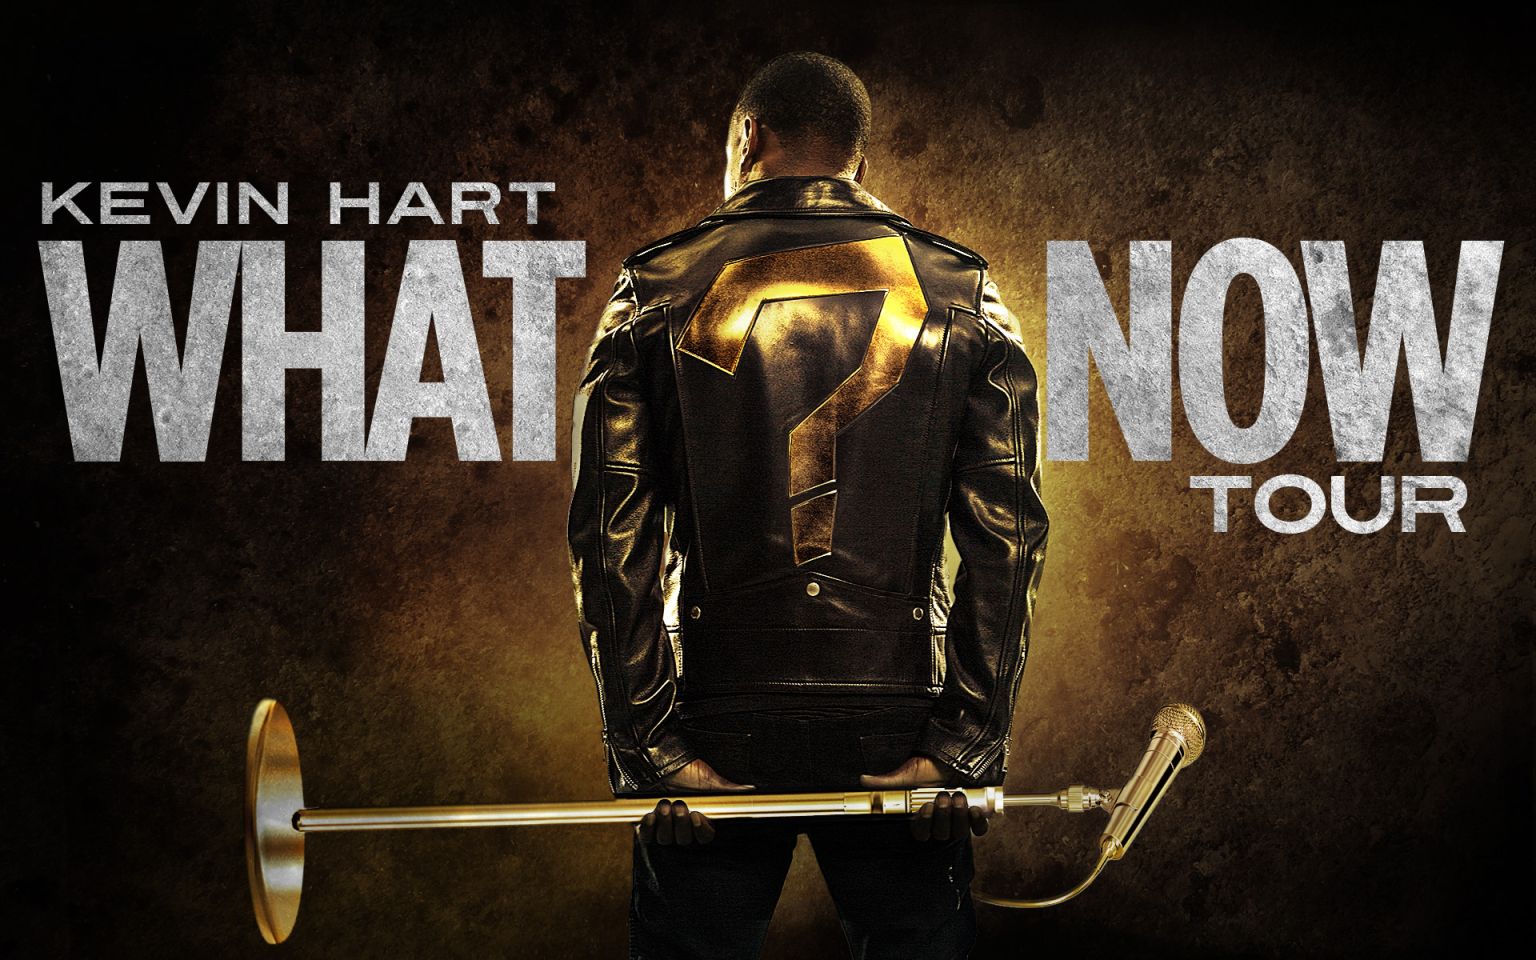 Kevin Hart “What Now” Tour | Majic 102.1